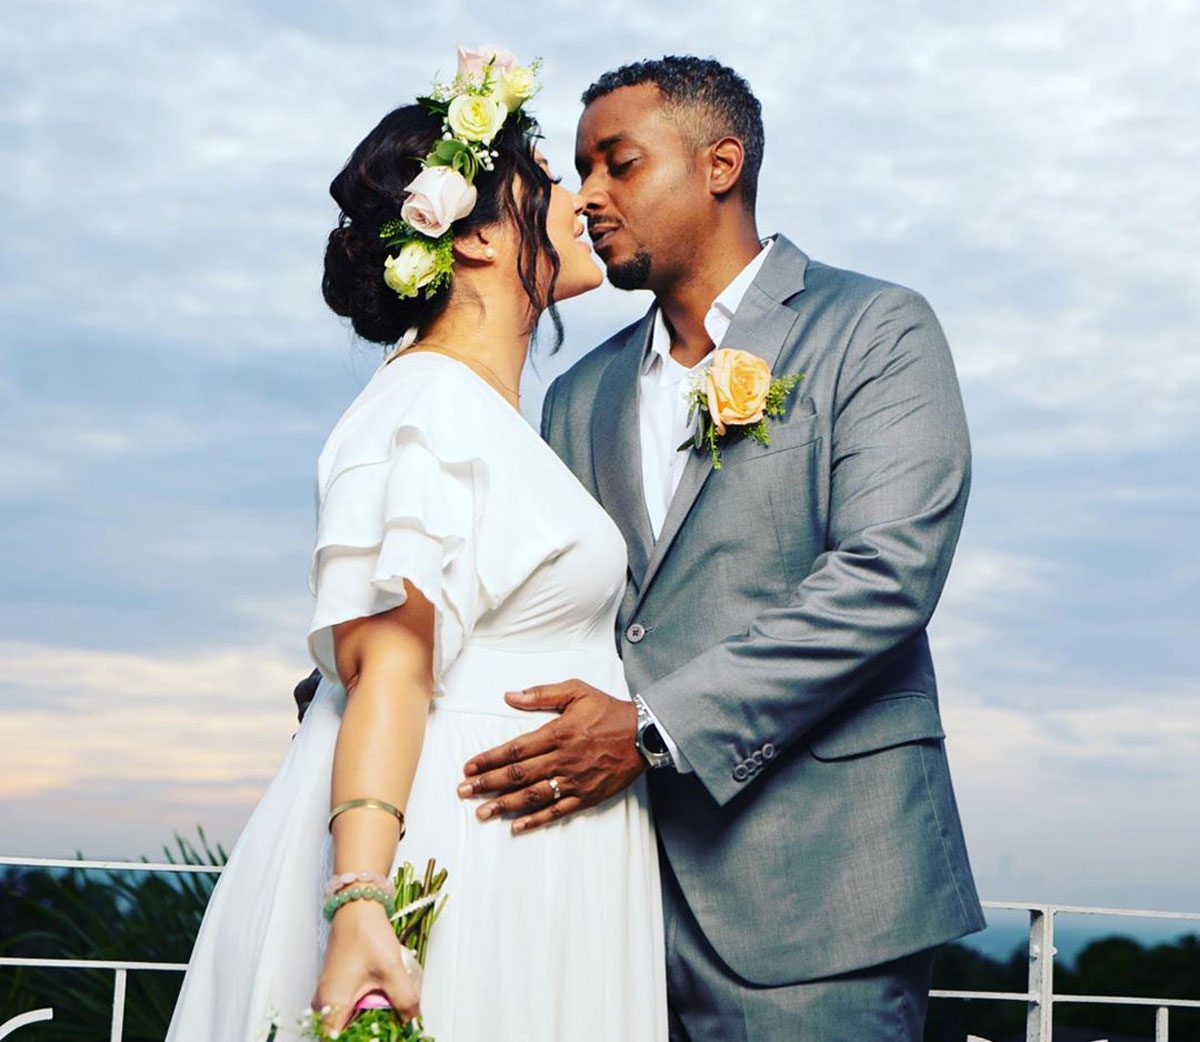 Tessanne Chin has tied the knot